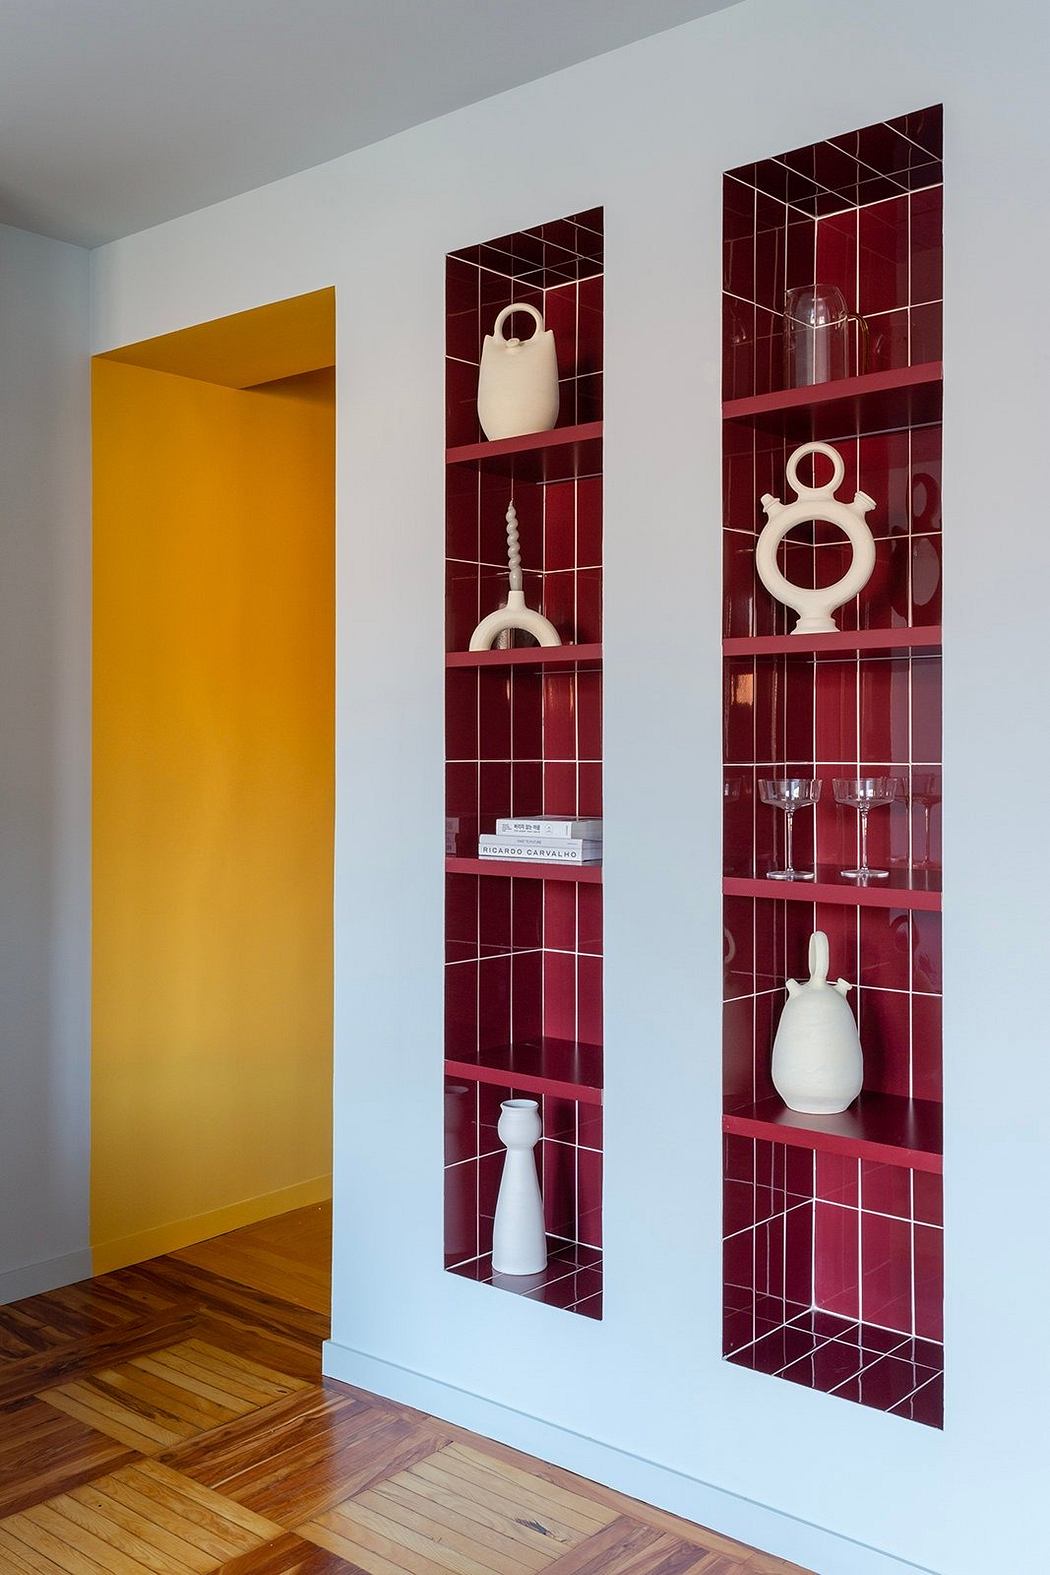 Modern room with a yellow door and a wall niche displaying white vases on red